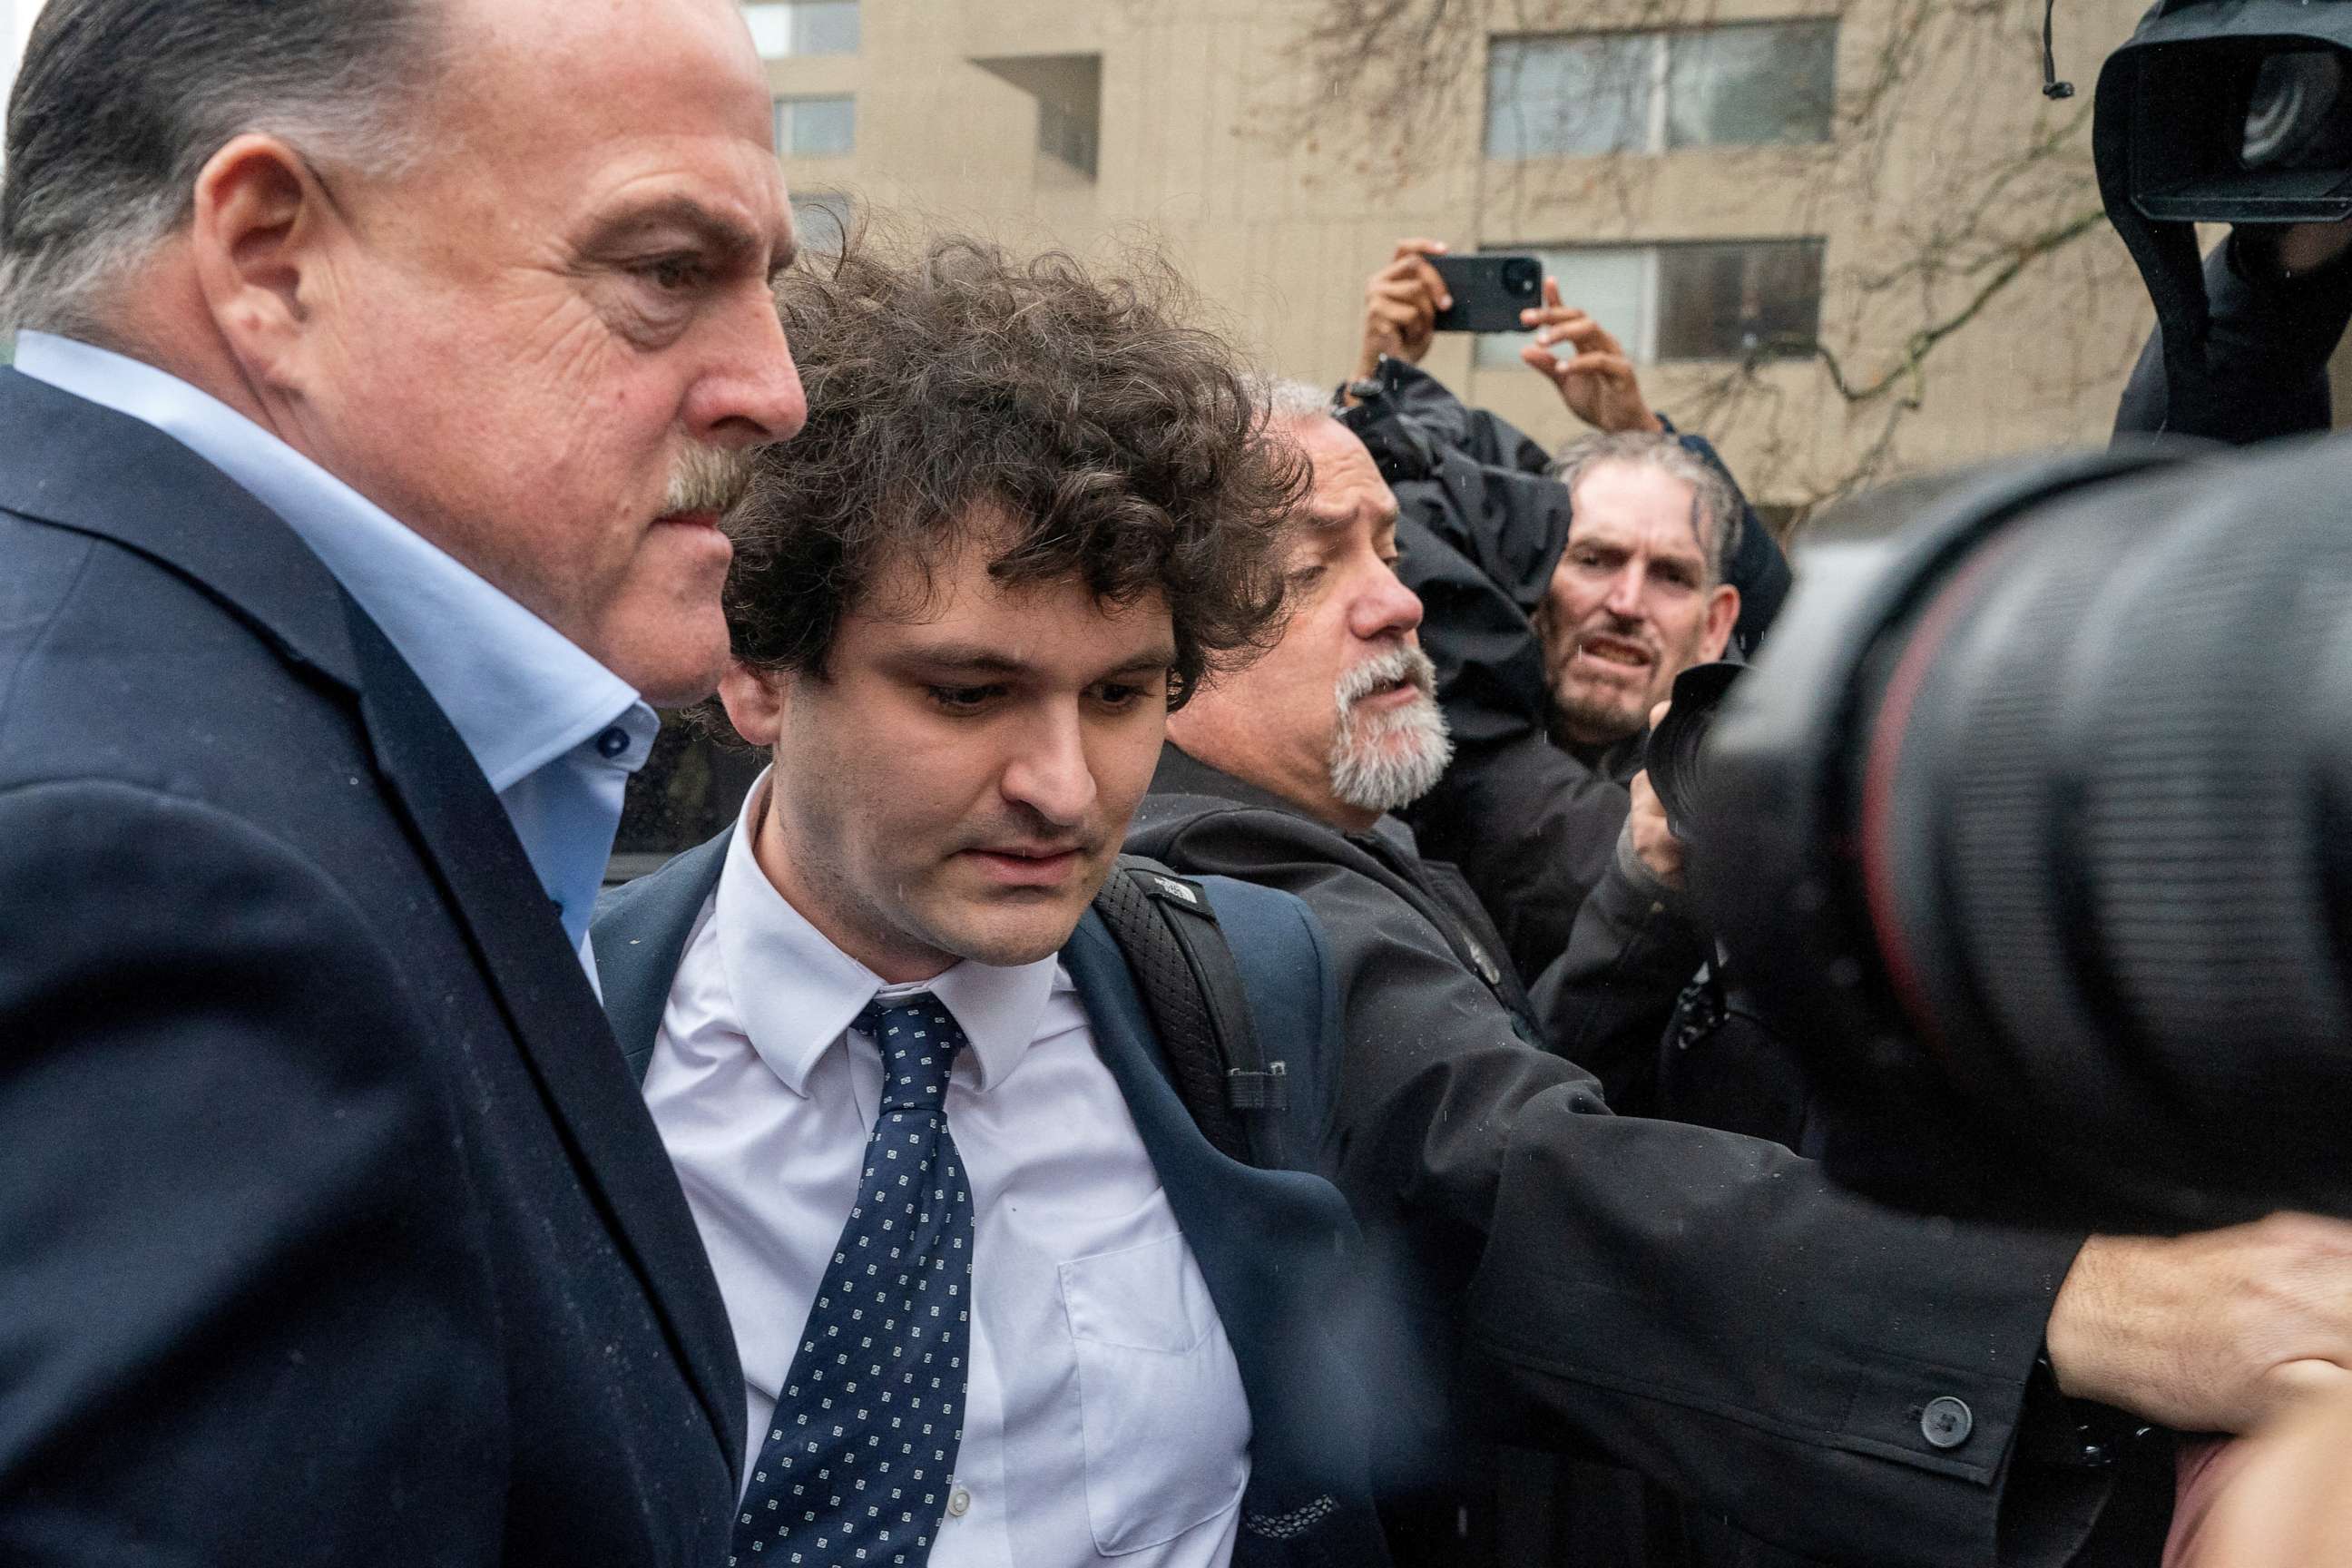 PHOTO: Former FTX CEO Sam Bankman-Fried, who faces fraud charges over the collapse of the bankrupt cryptocurrency exchange, arrives on the day of a hearing at Manhattan federal court in New York City, Jan. 3, 2023.